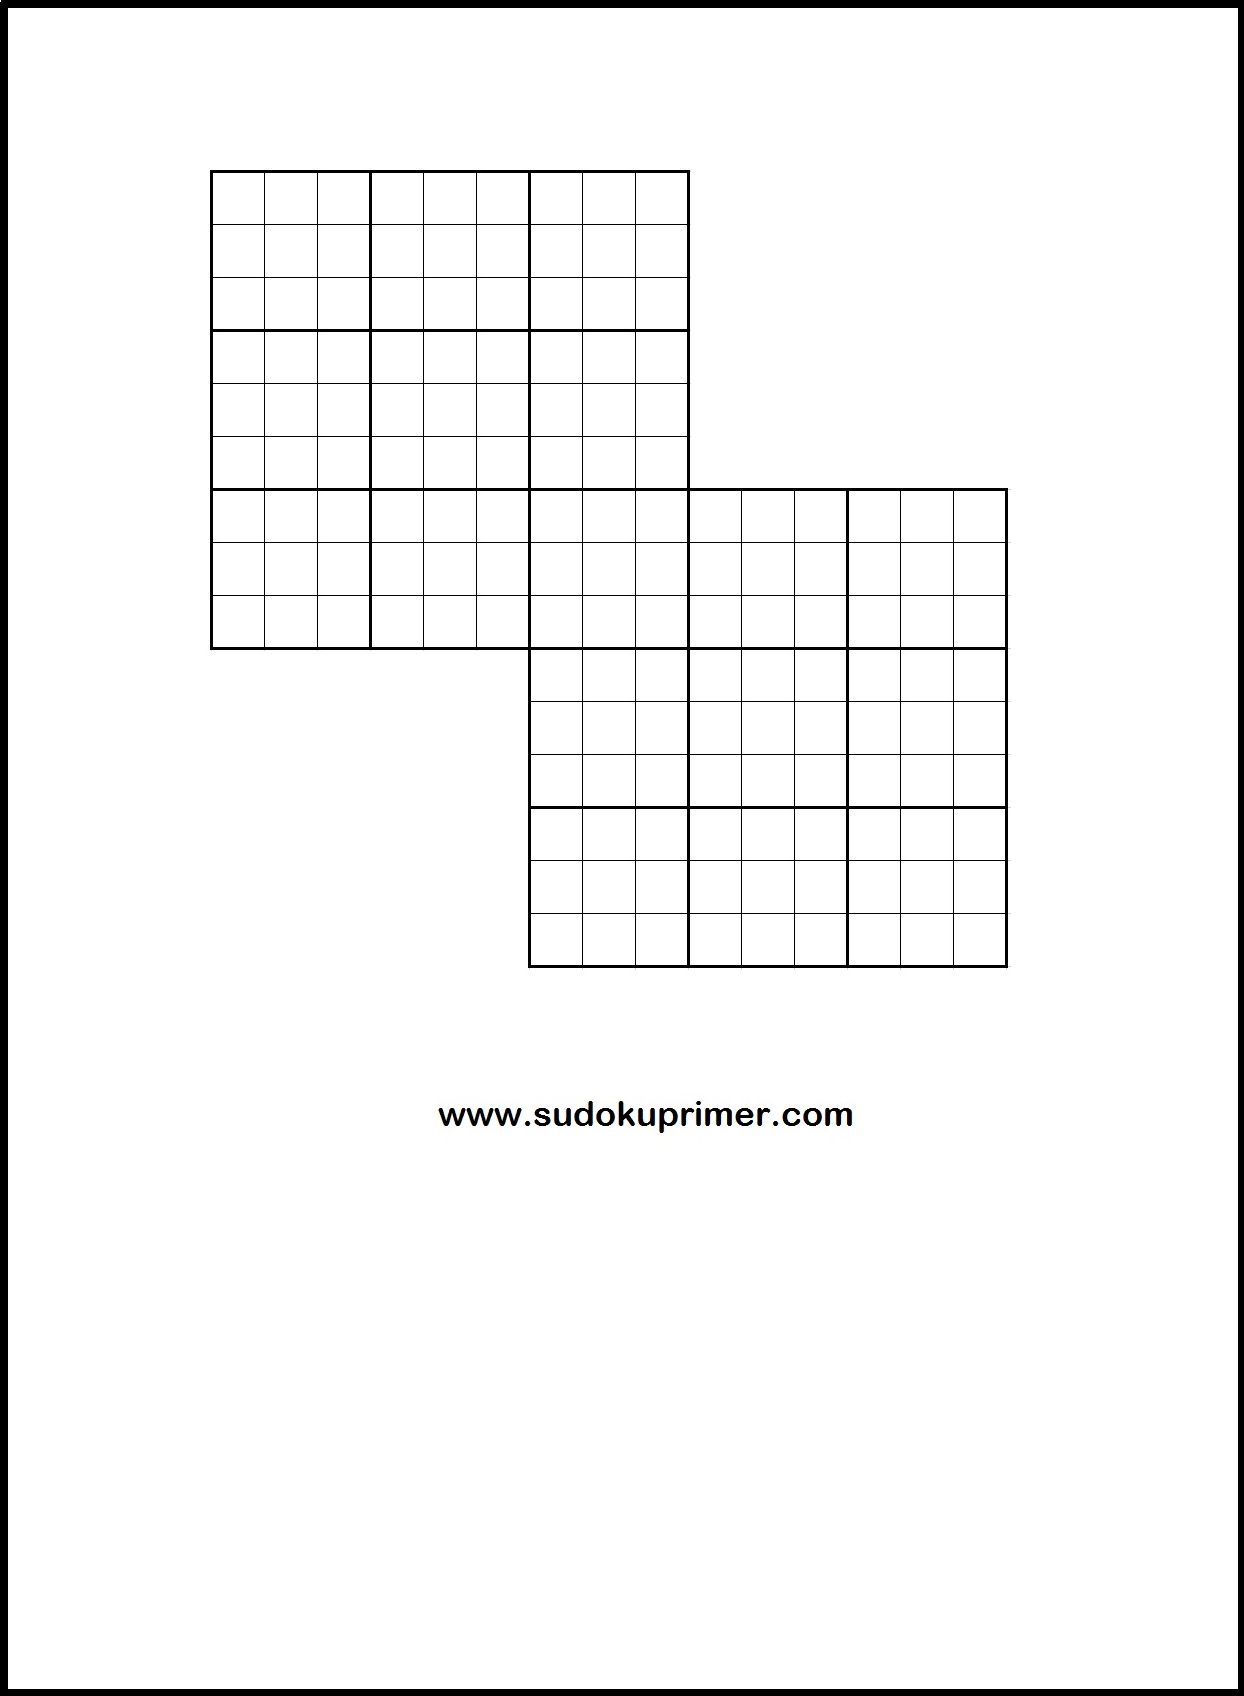 1 x 1 classic overlapping sudoku blank grid in .pdf format